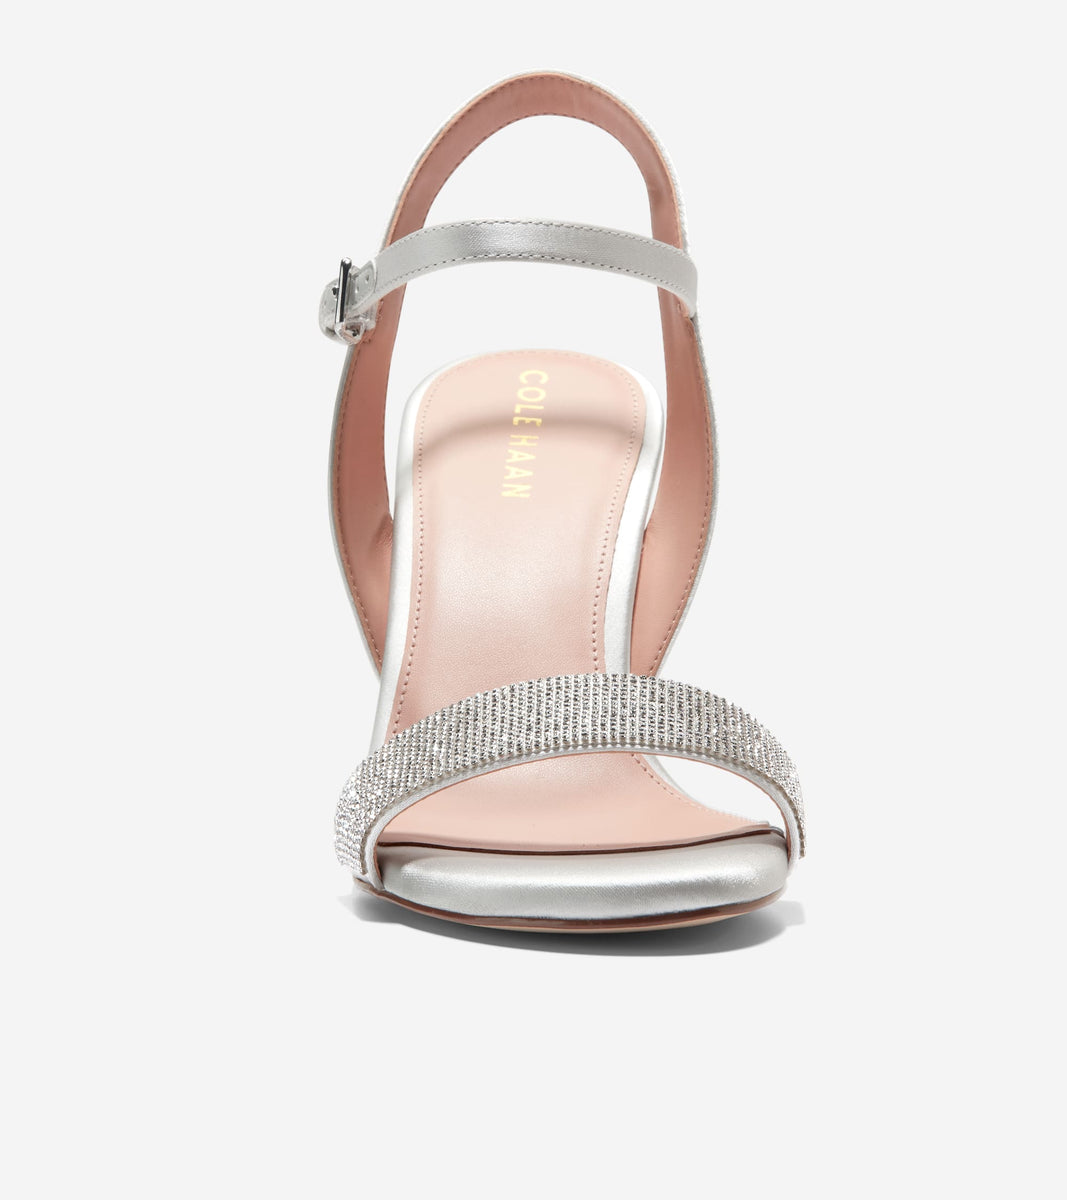 W30331:ALL OVER CRYSTAL/GRAY SATIN